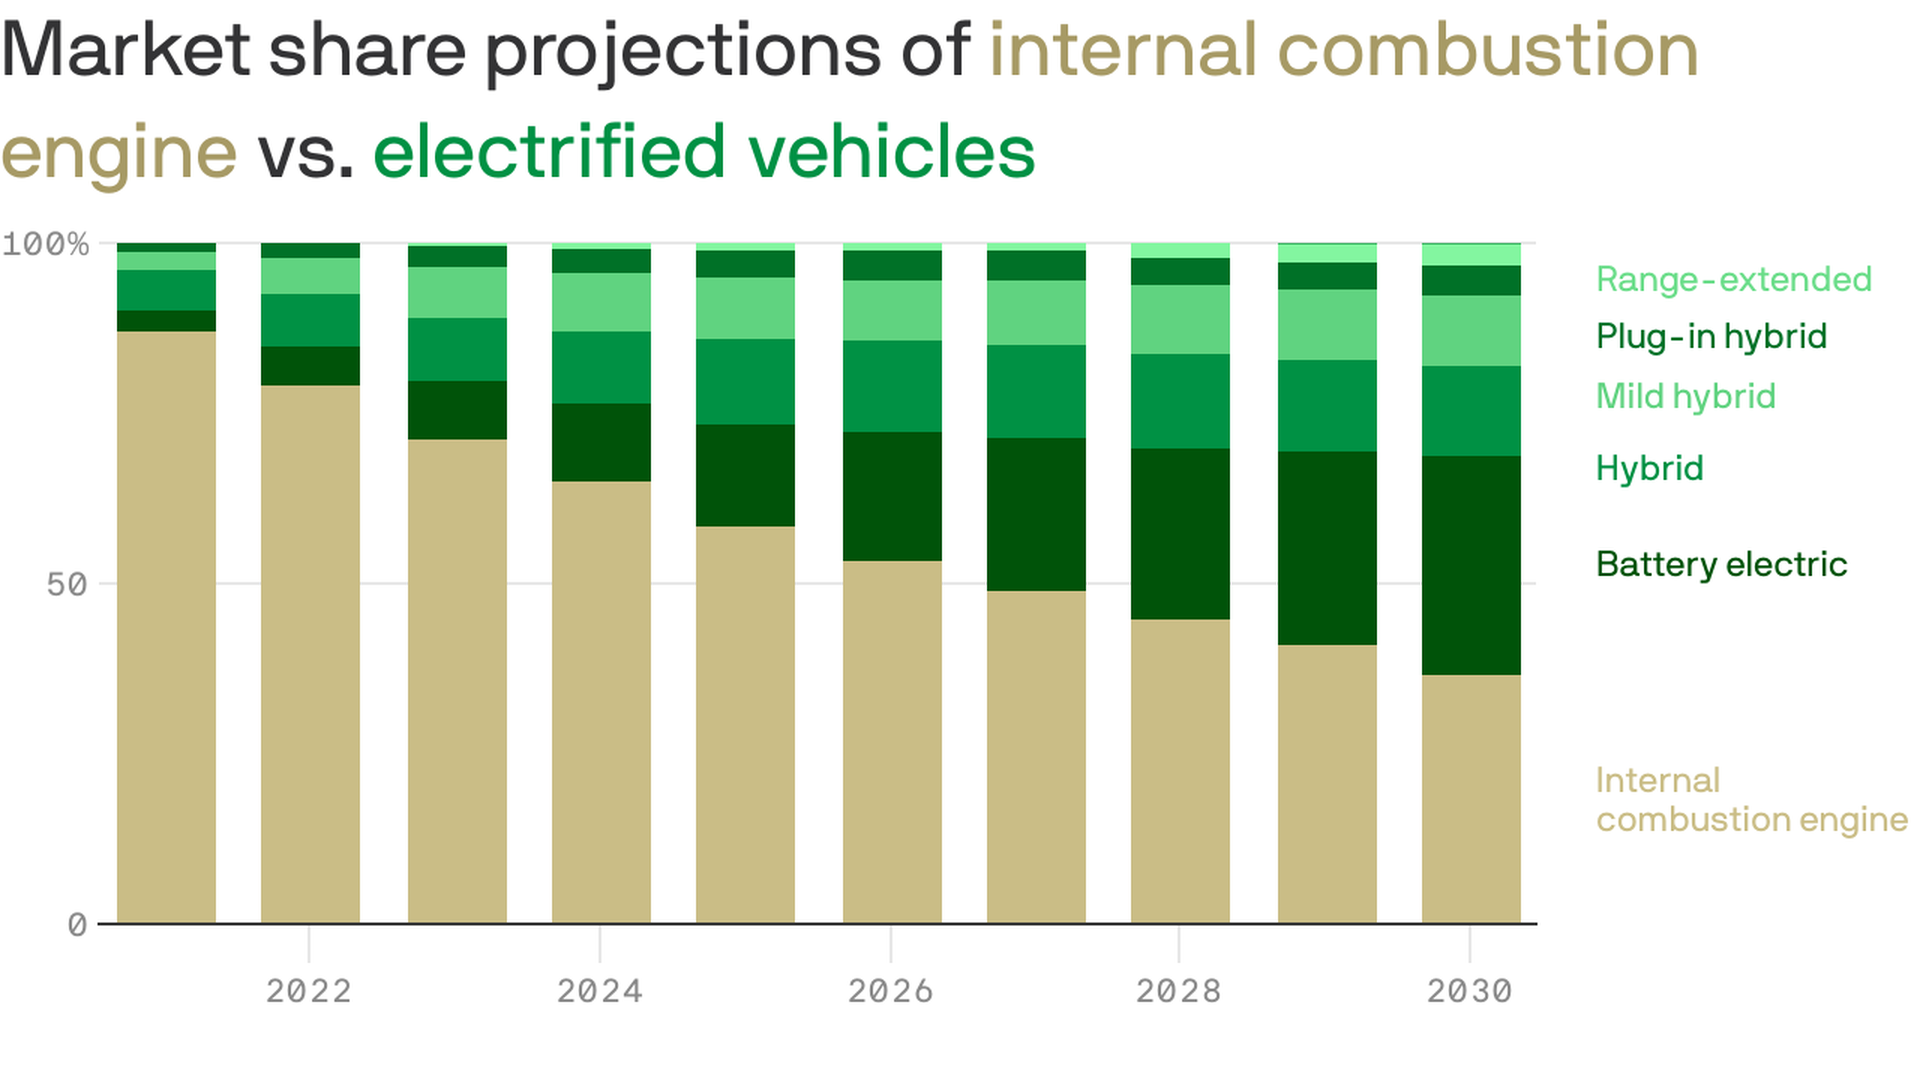 Market share projections of internal combustion engine vs. electrified vehicles